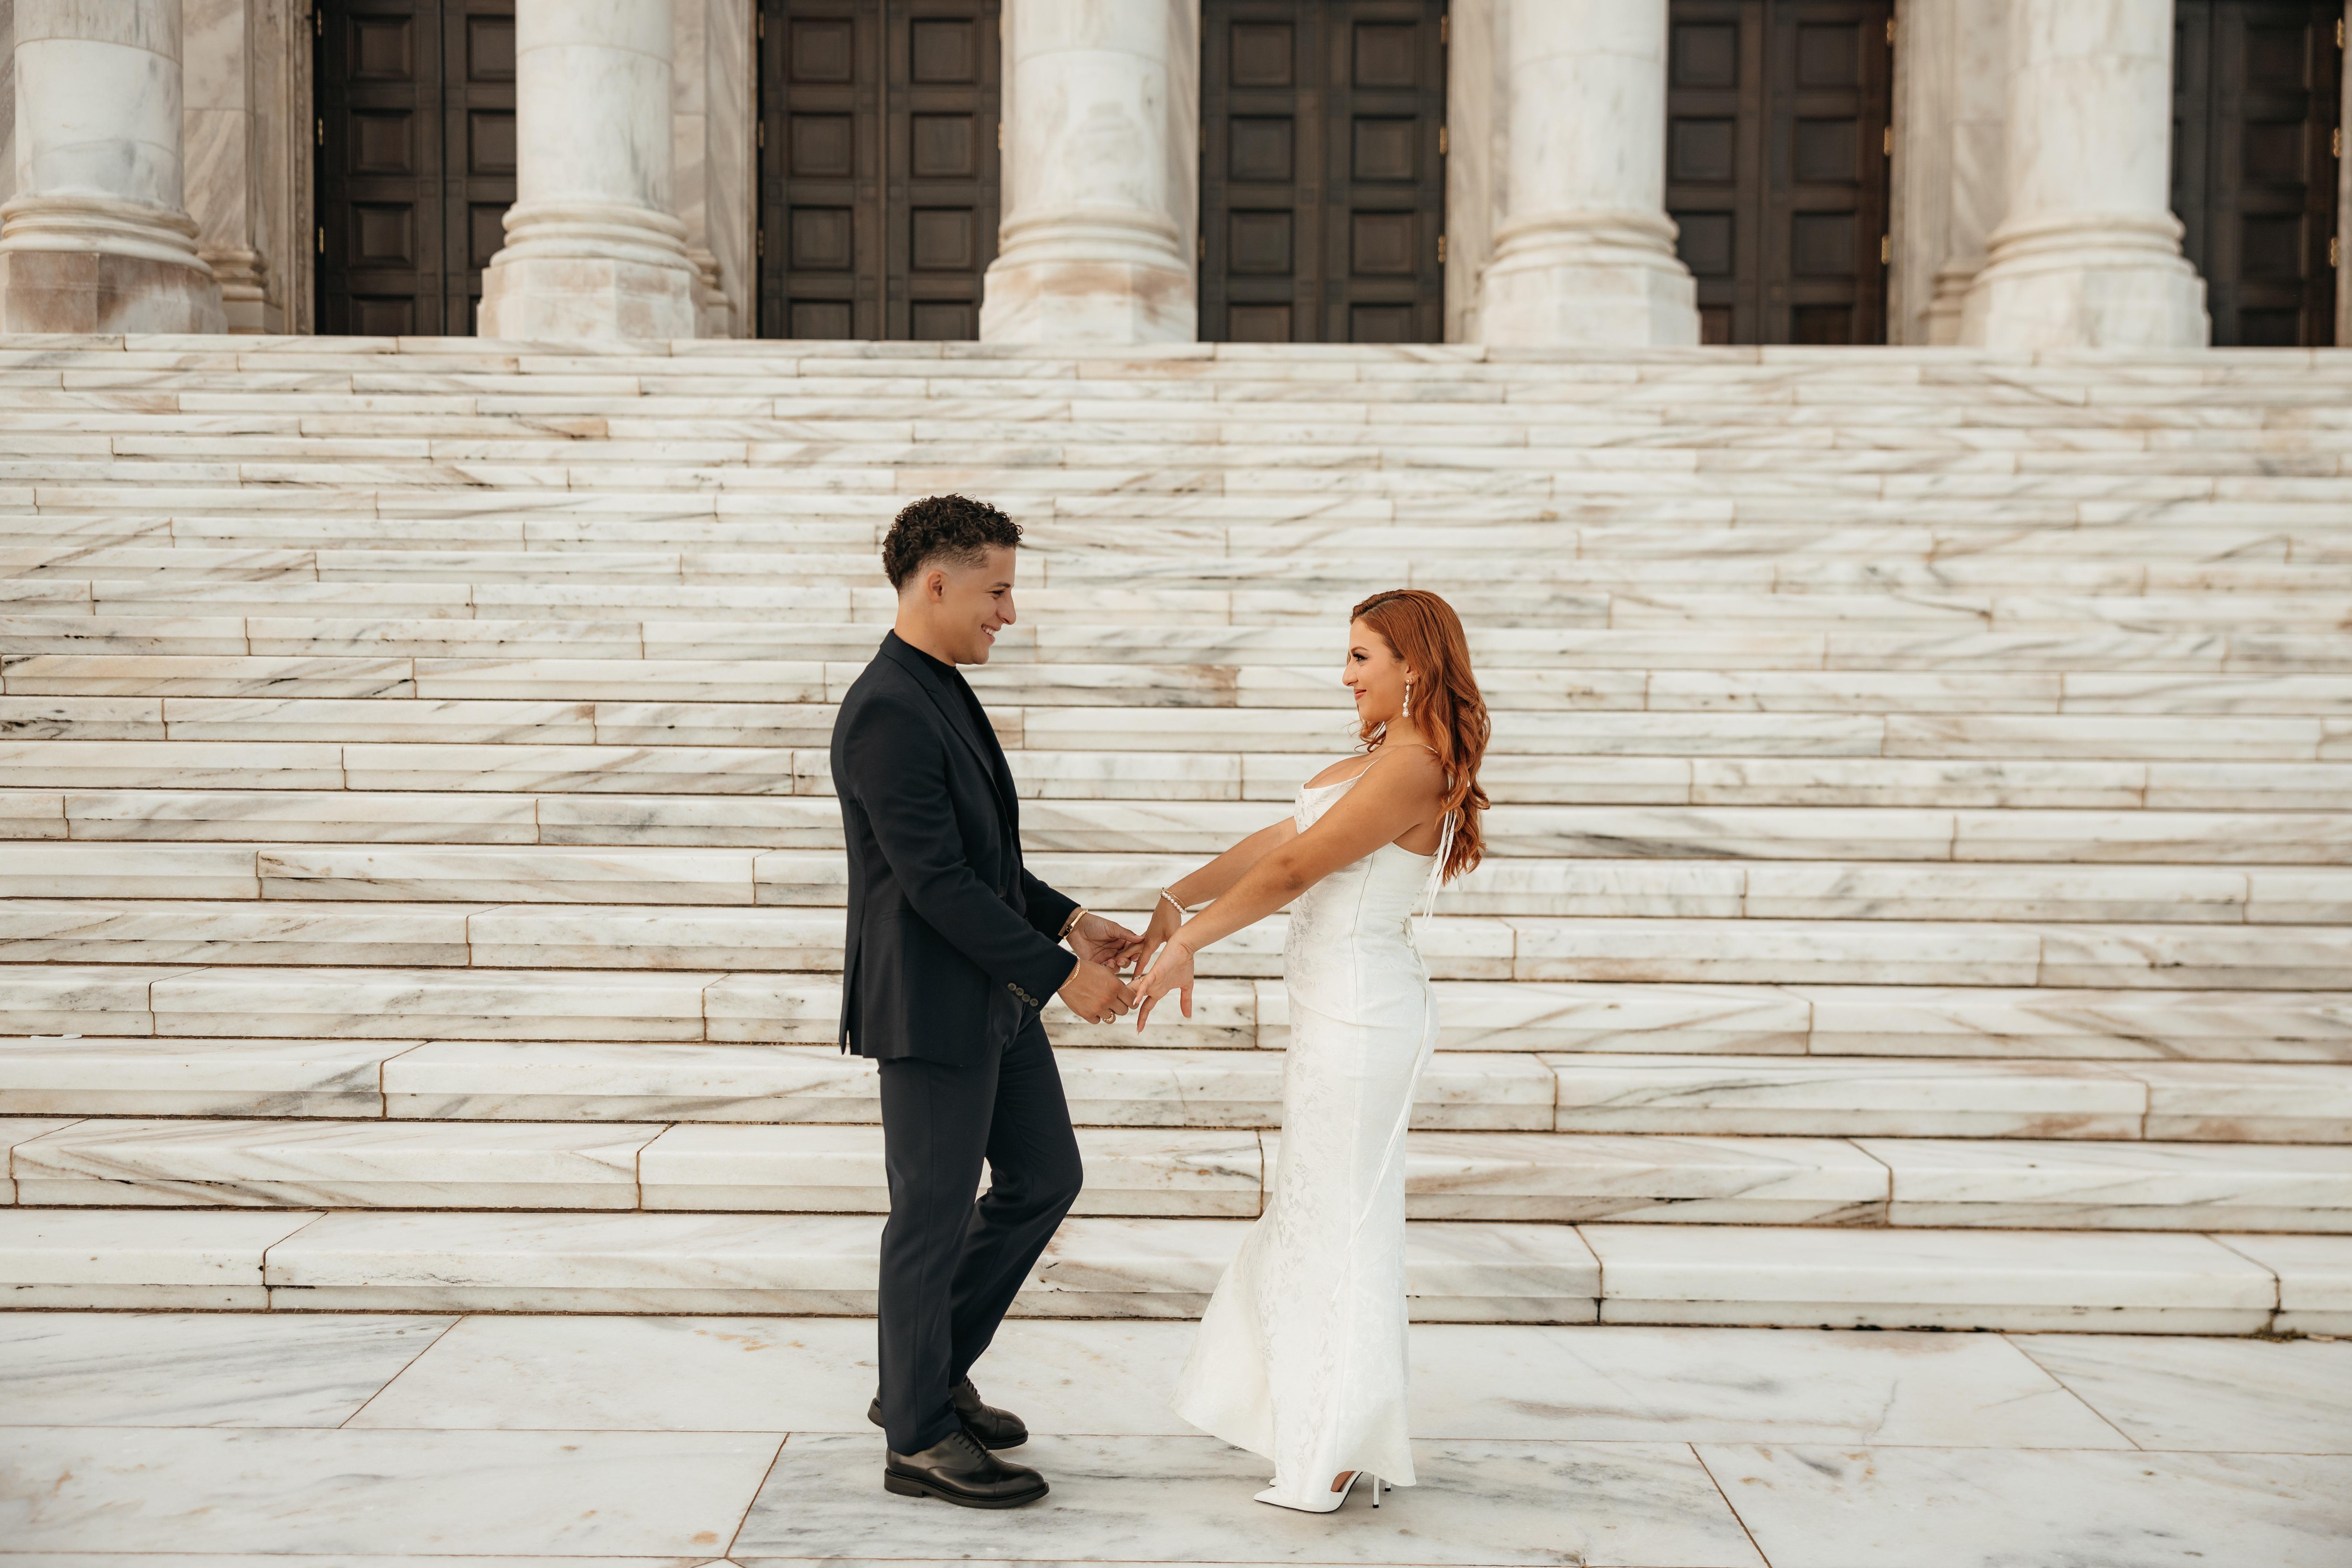 The Wedding Website of Shannon Soto and Héctor Reyes